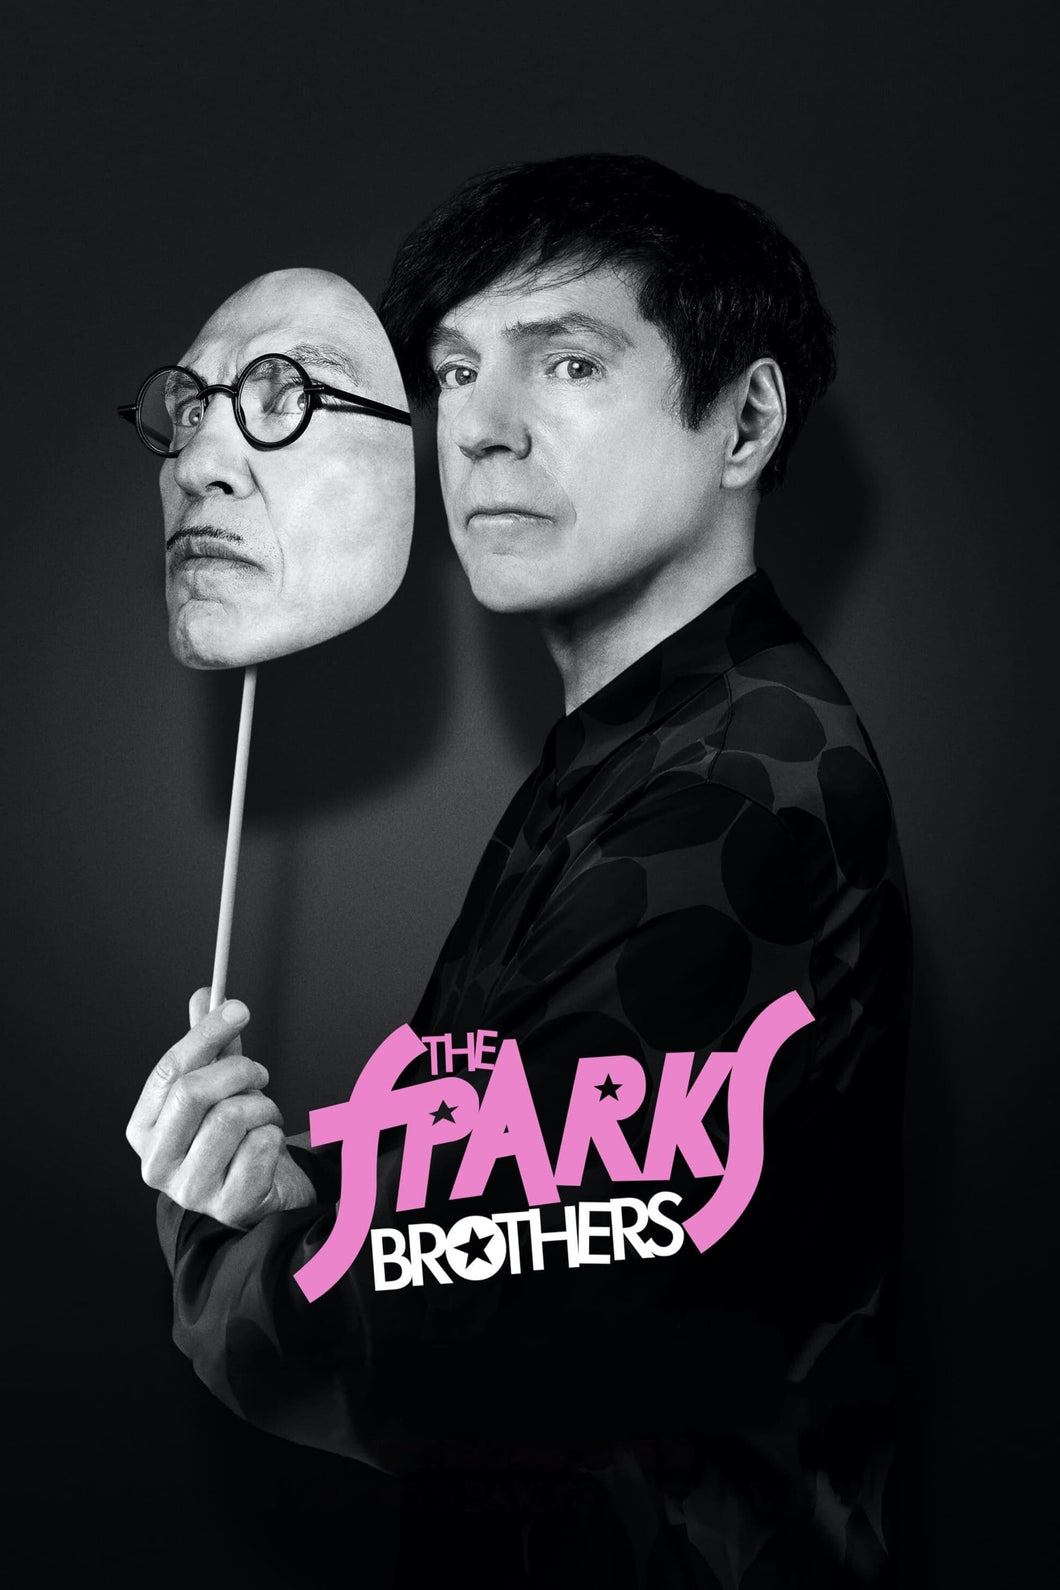 The Sparks Brothers (2021) Movie Poster High Quality Glossy Paper A1 A2 A3 A4 A3 Framed or Unframed!!!